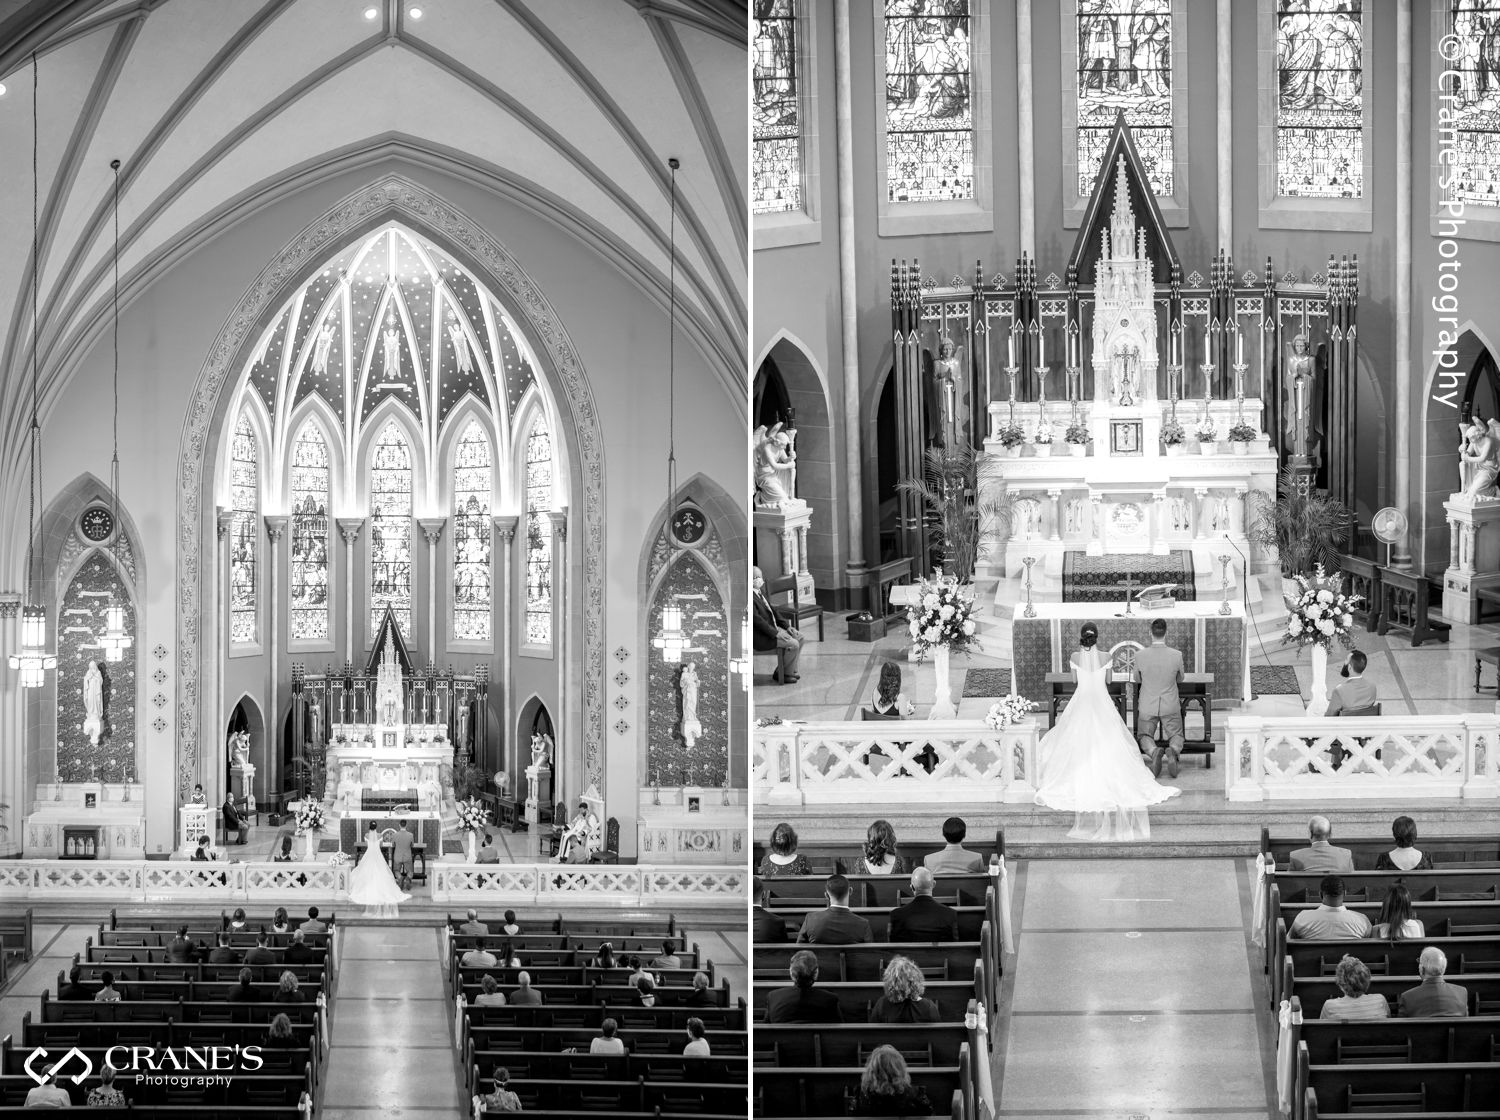 A composite photo taken from the balcony of St. Peter and Paul Church in Naperville during an intimate wedding ceremony